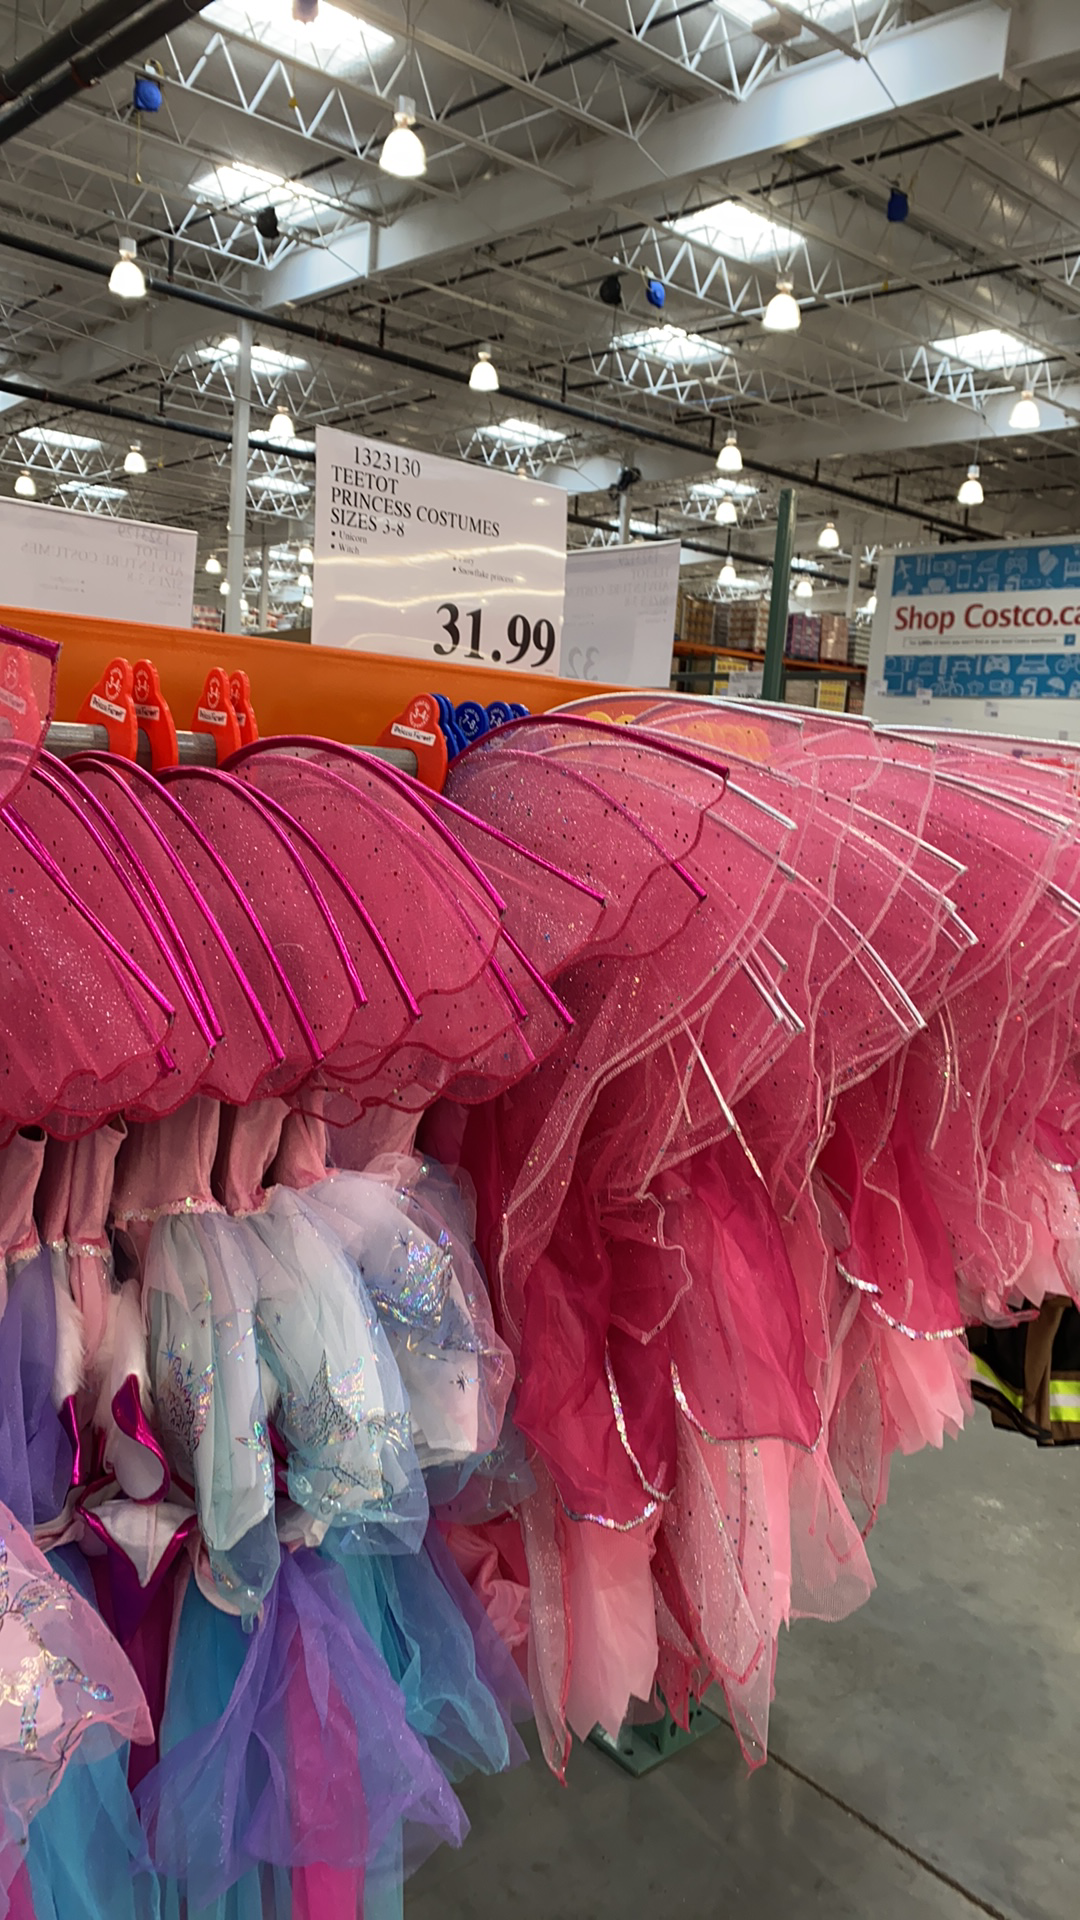 Costco bonus markdowns and Halloween costumes are out!!!